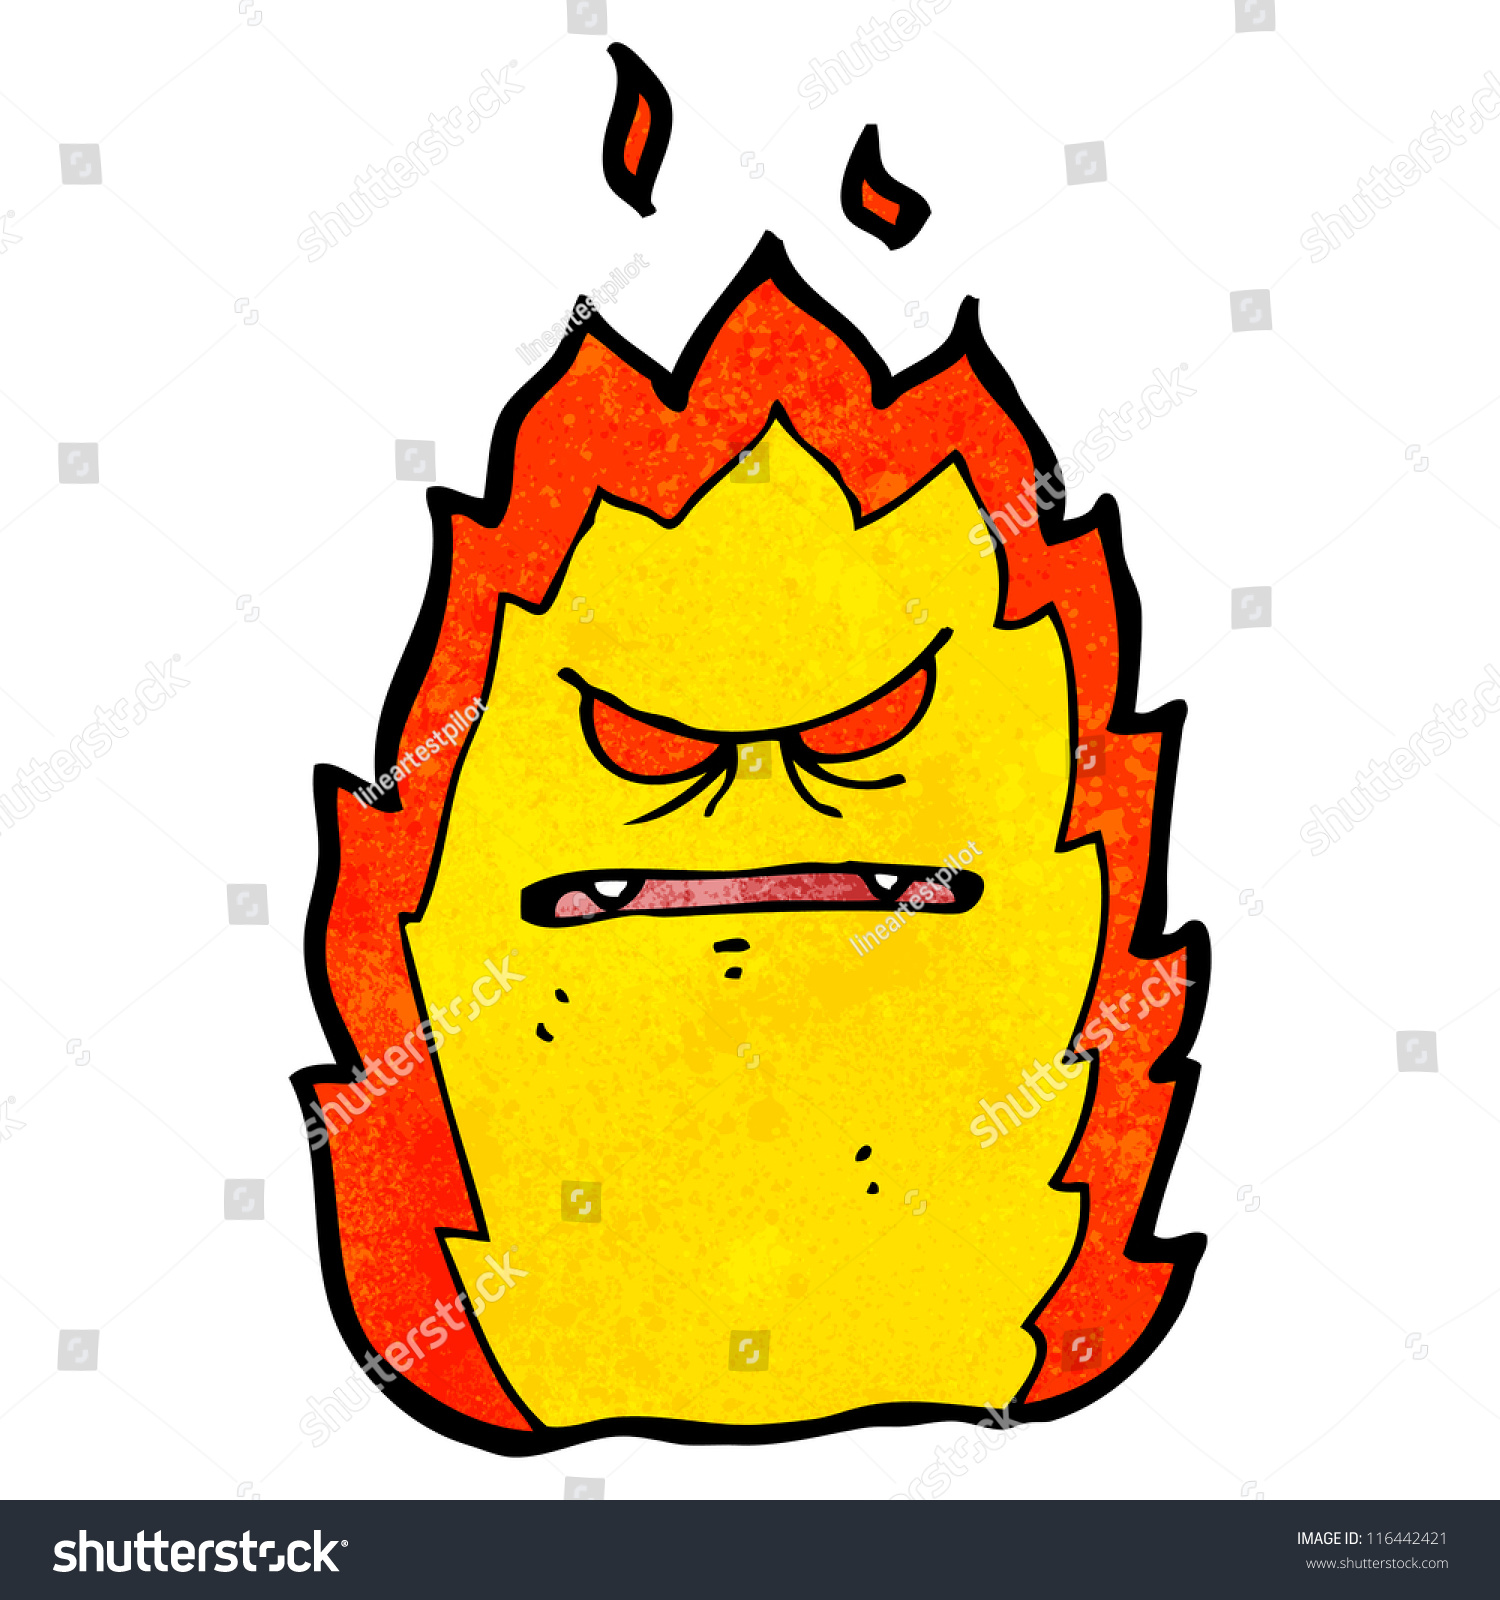 Angry Fire Cartoon Character Stock Vector Illustration 116442421 ...